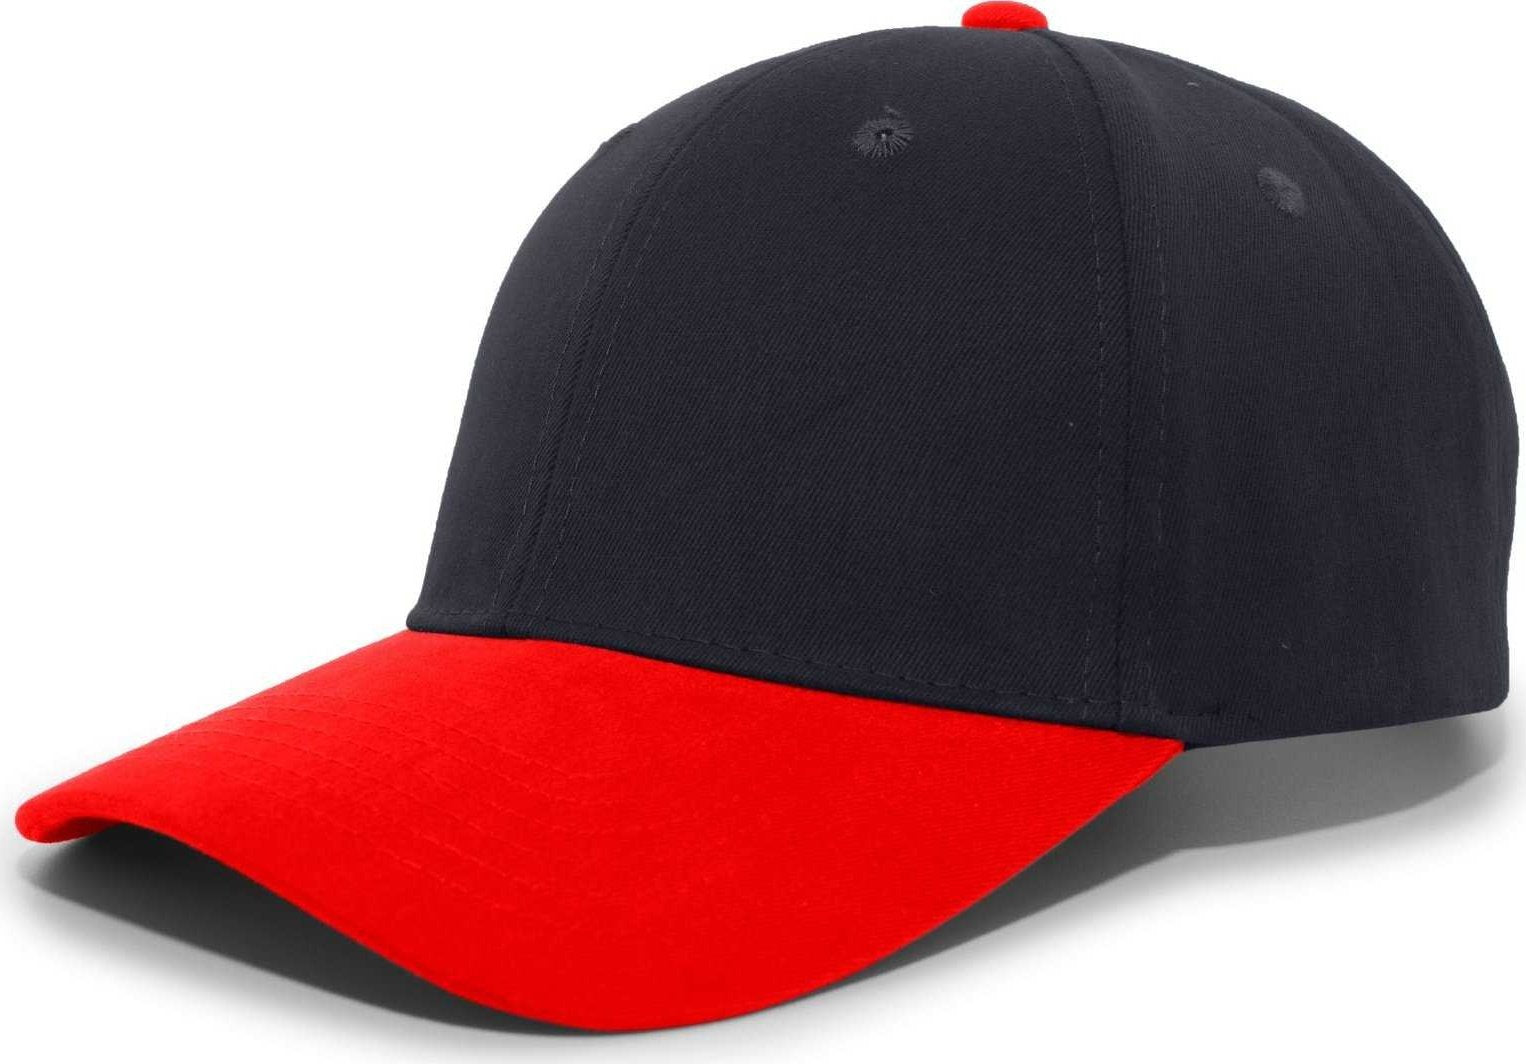 Headwear Hook-and-Loop Cap Navy - 101C Pacific Cotton Red Brushed